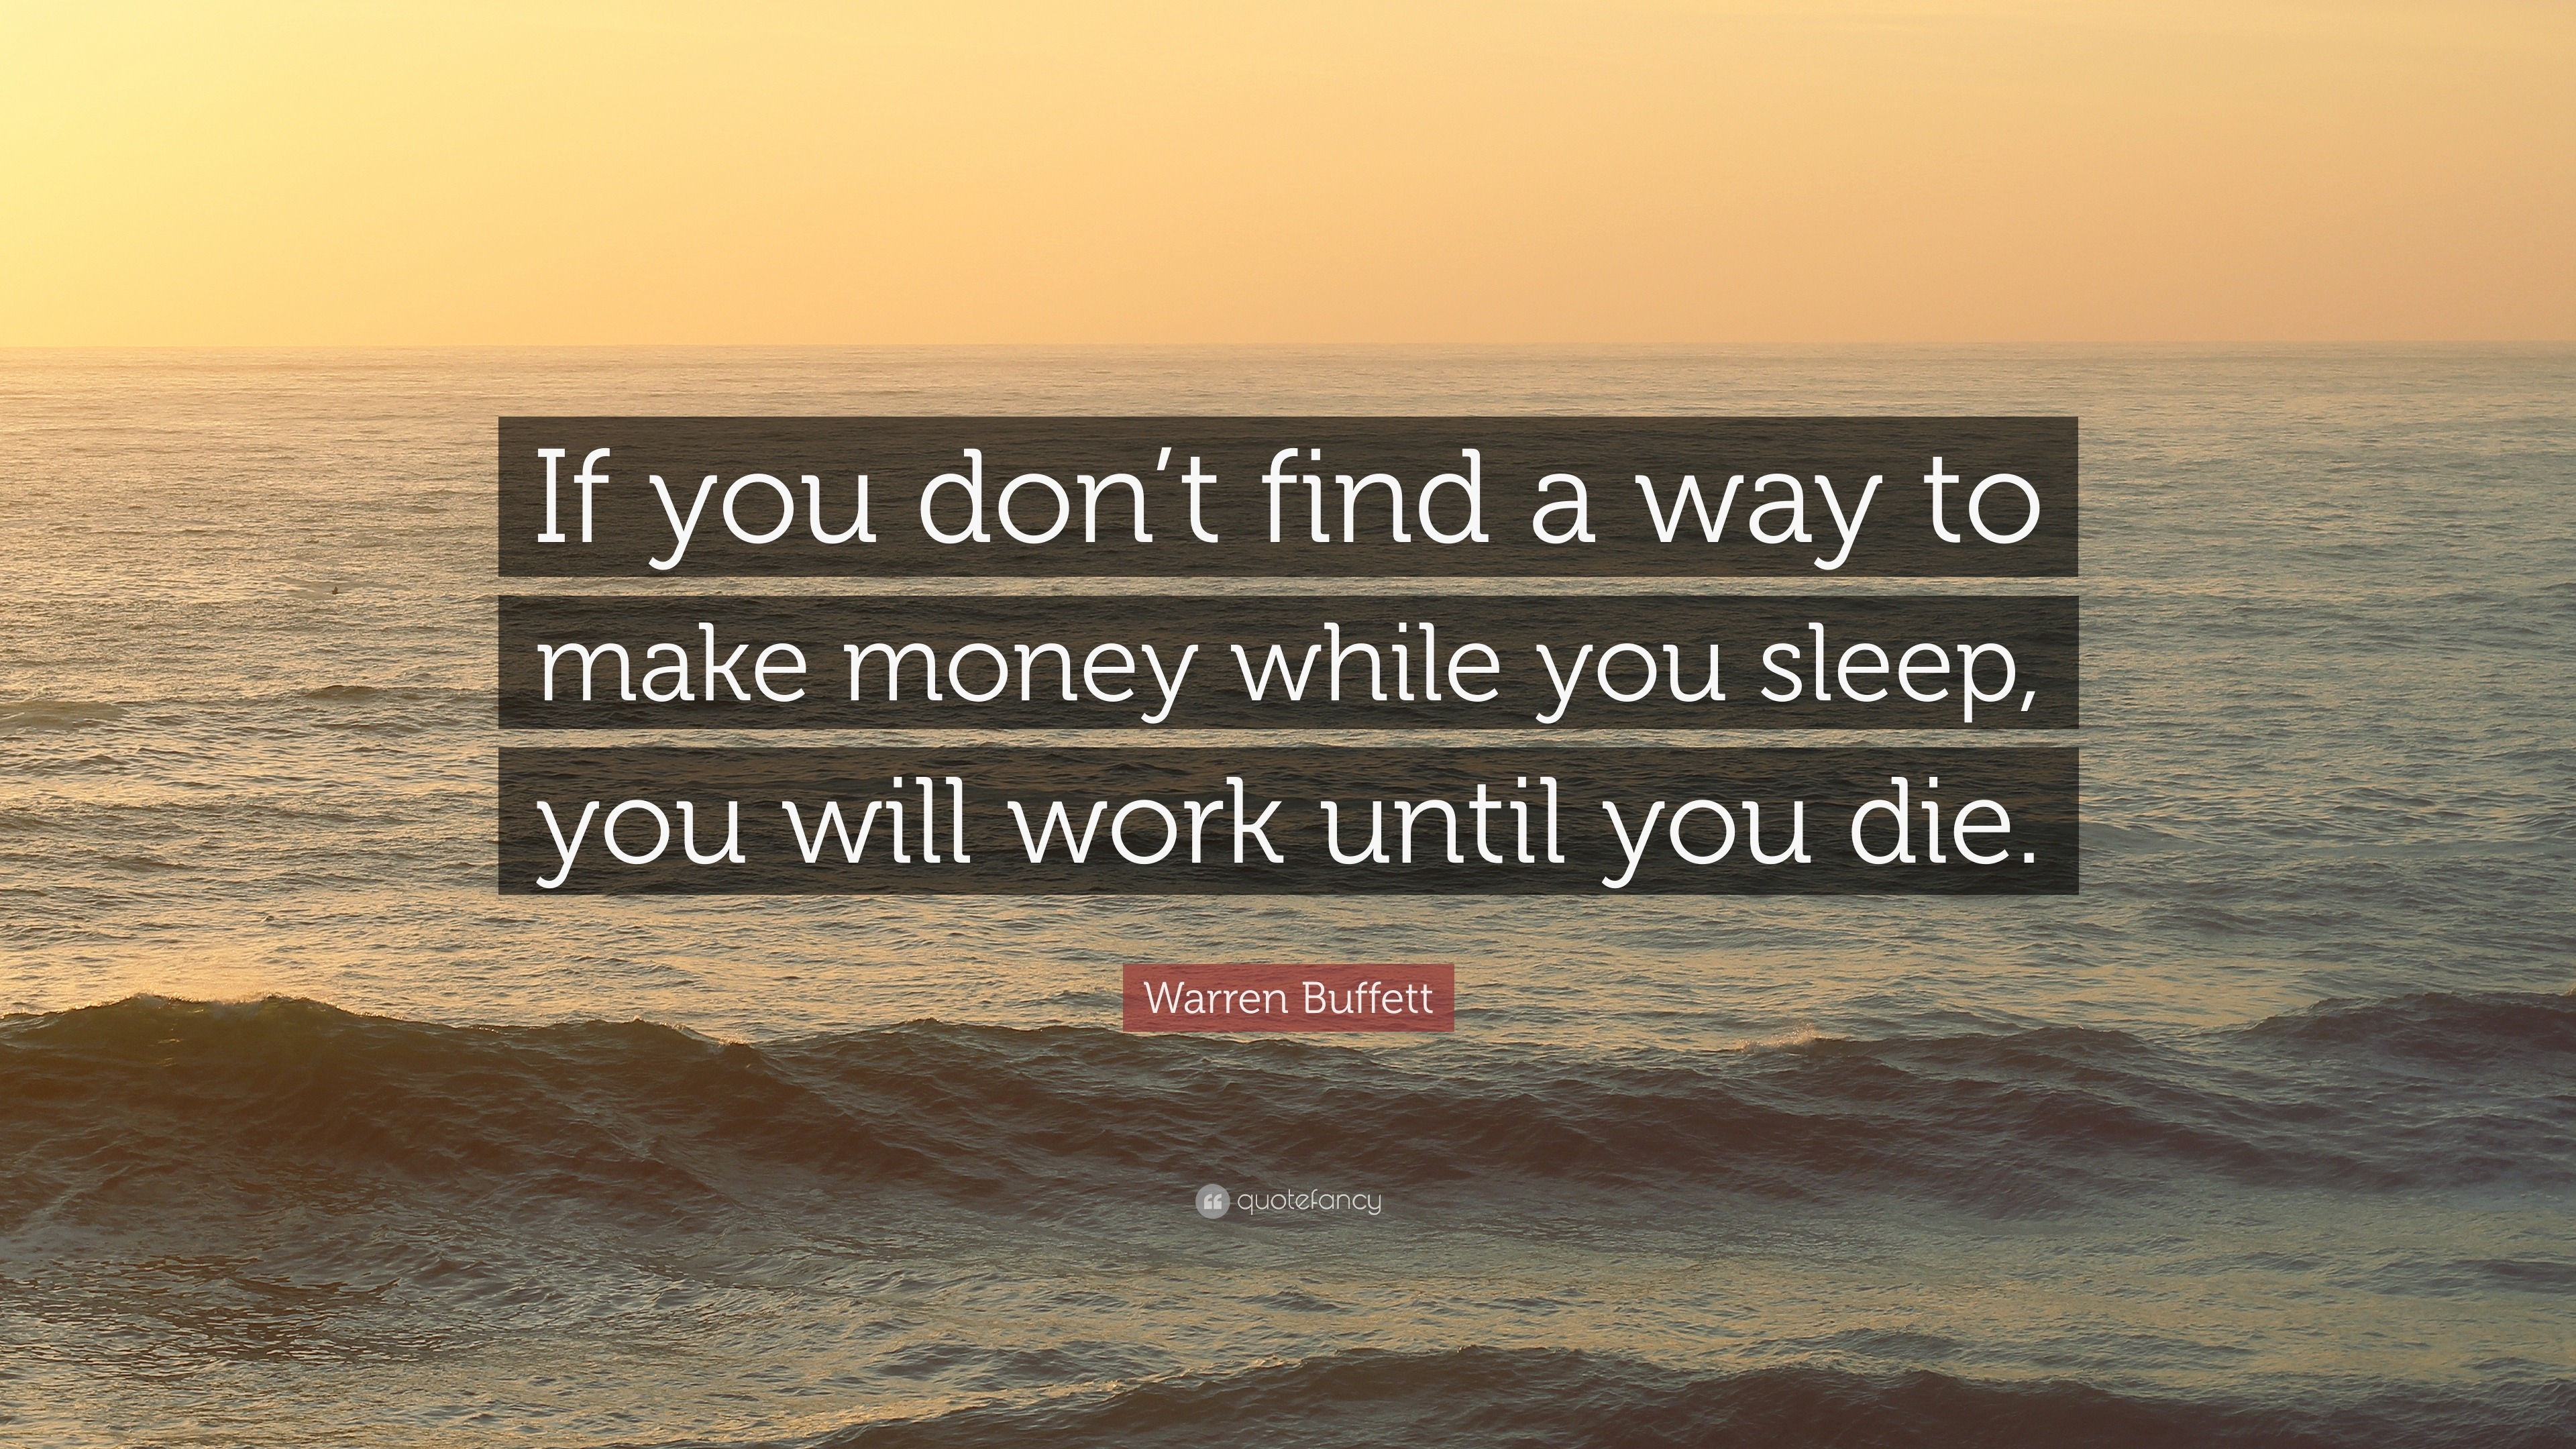 Warren Buffett Quote If You Don T Find A Way To Make Money While You Sleep You Will Work Until You Die 17 Wallpapers Quotefancy